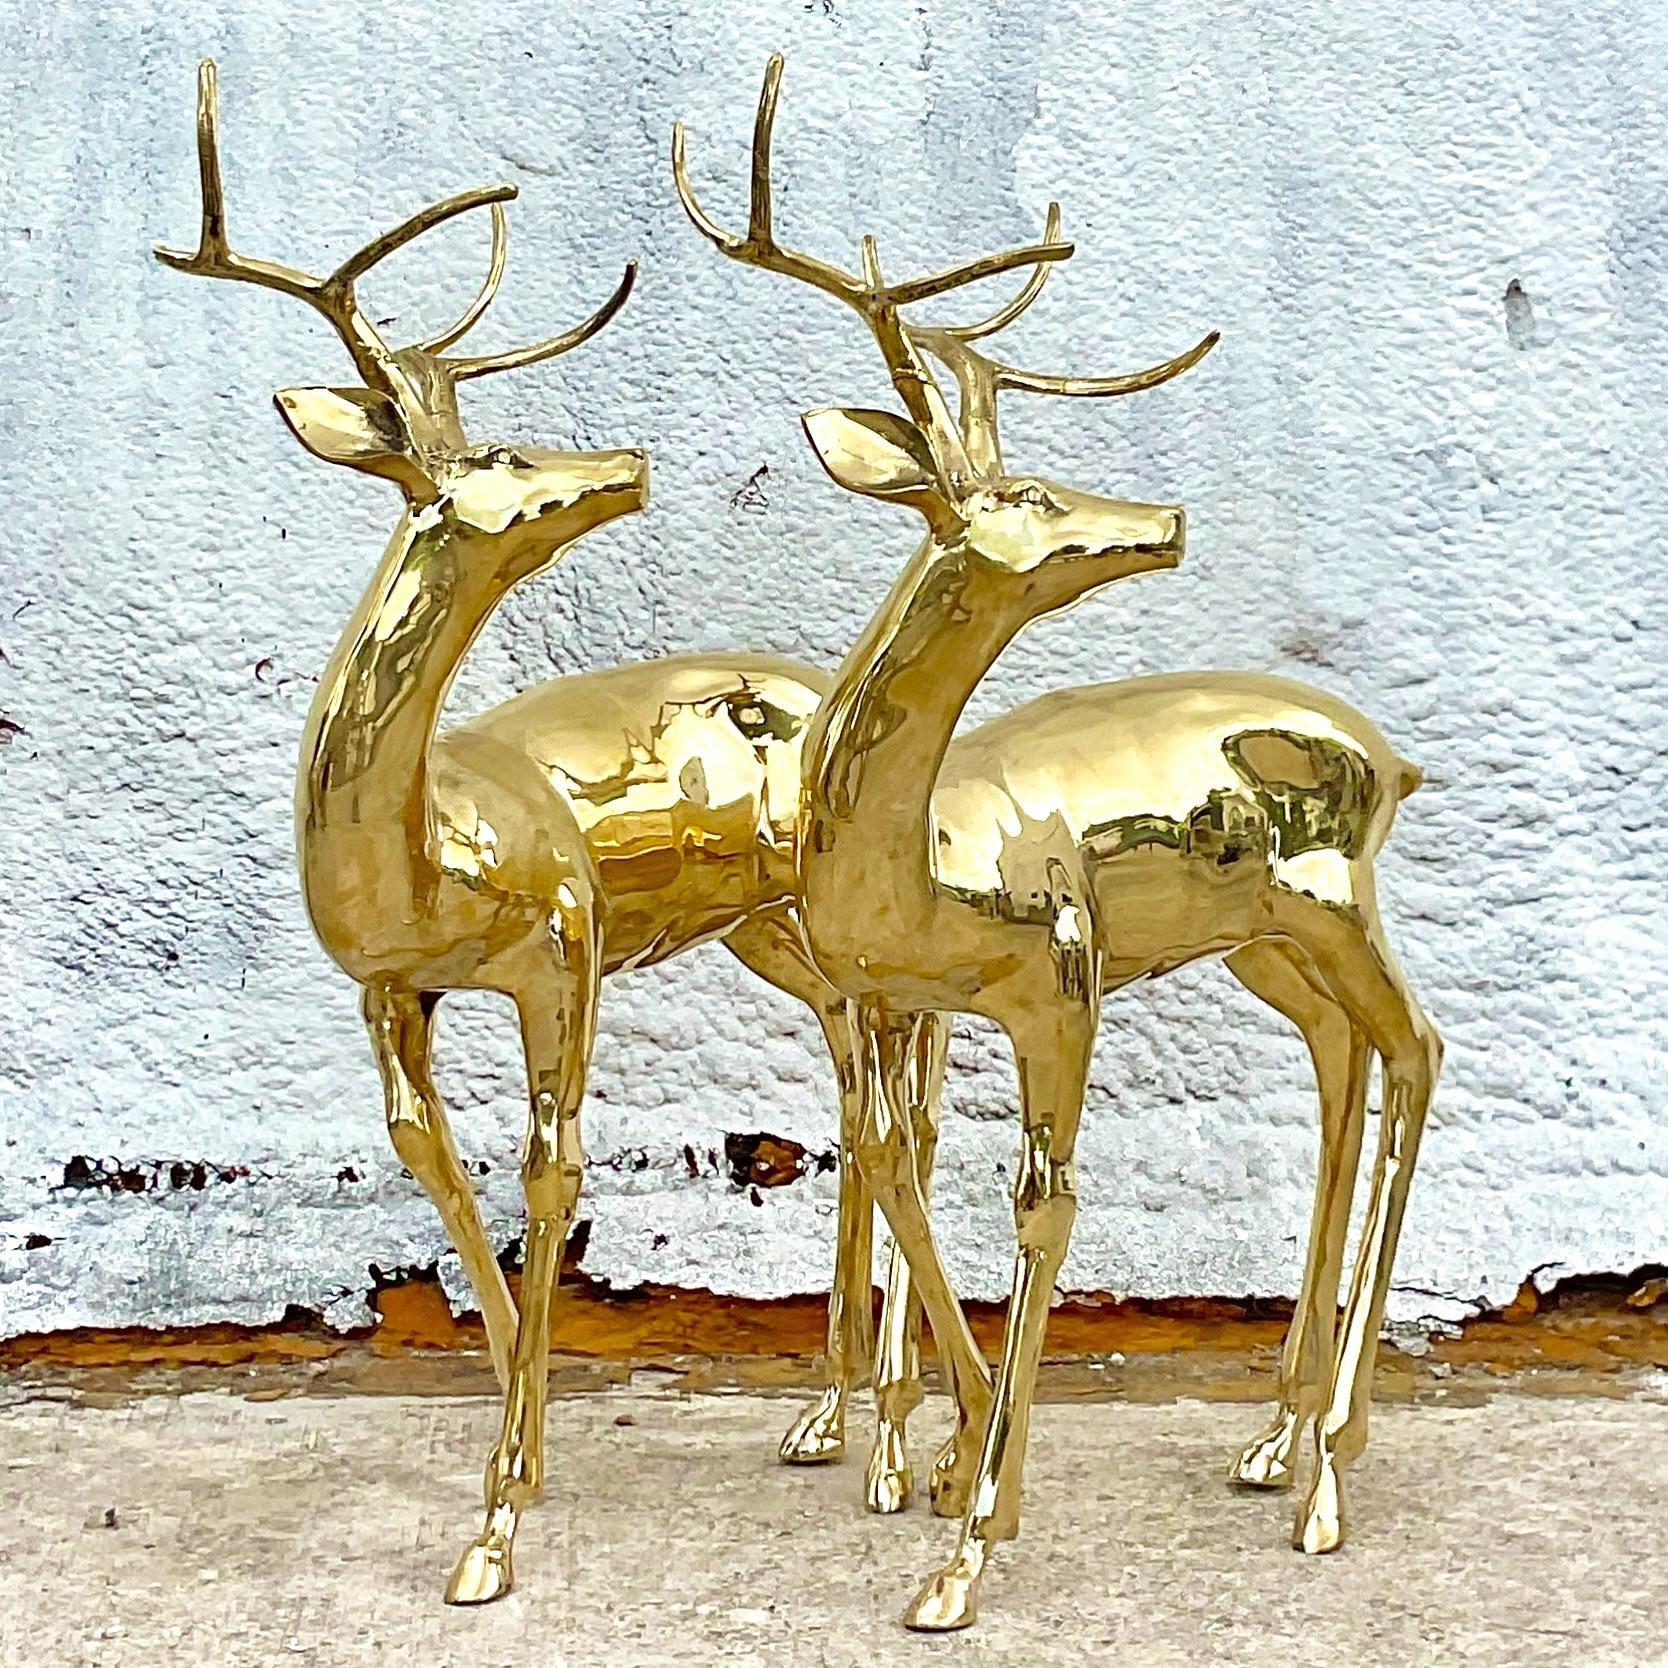 A spectacular pair of vintage Regency deer. A gorgeous high polished mirror finish. Monumental in size and drama. Acquired from a Palm Beach estate.